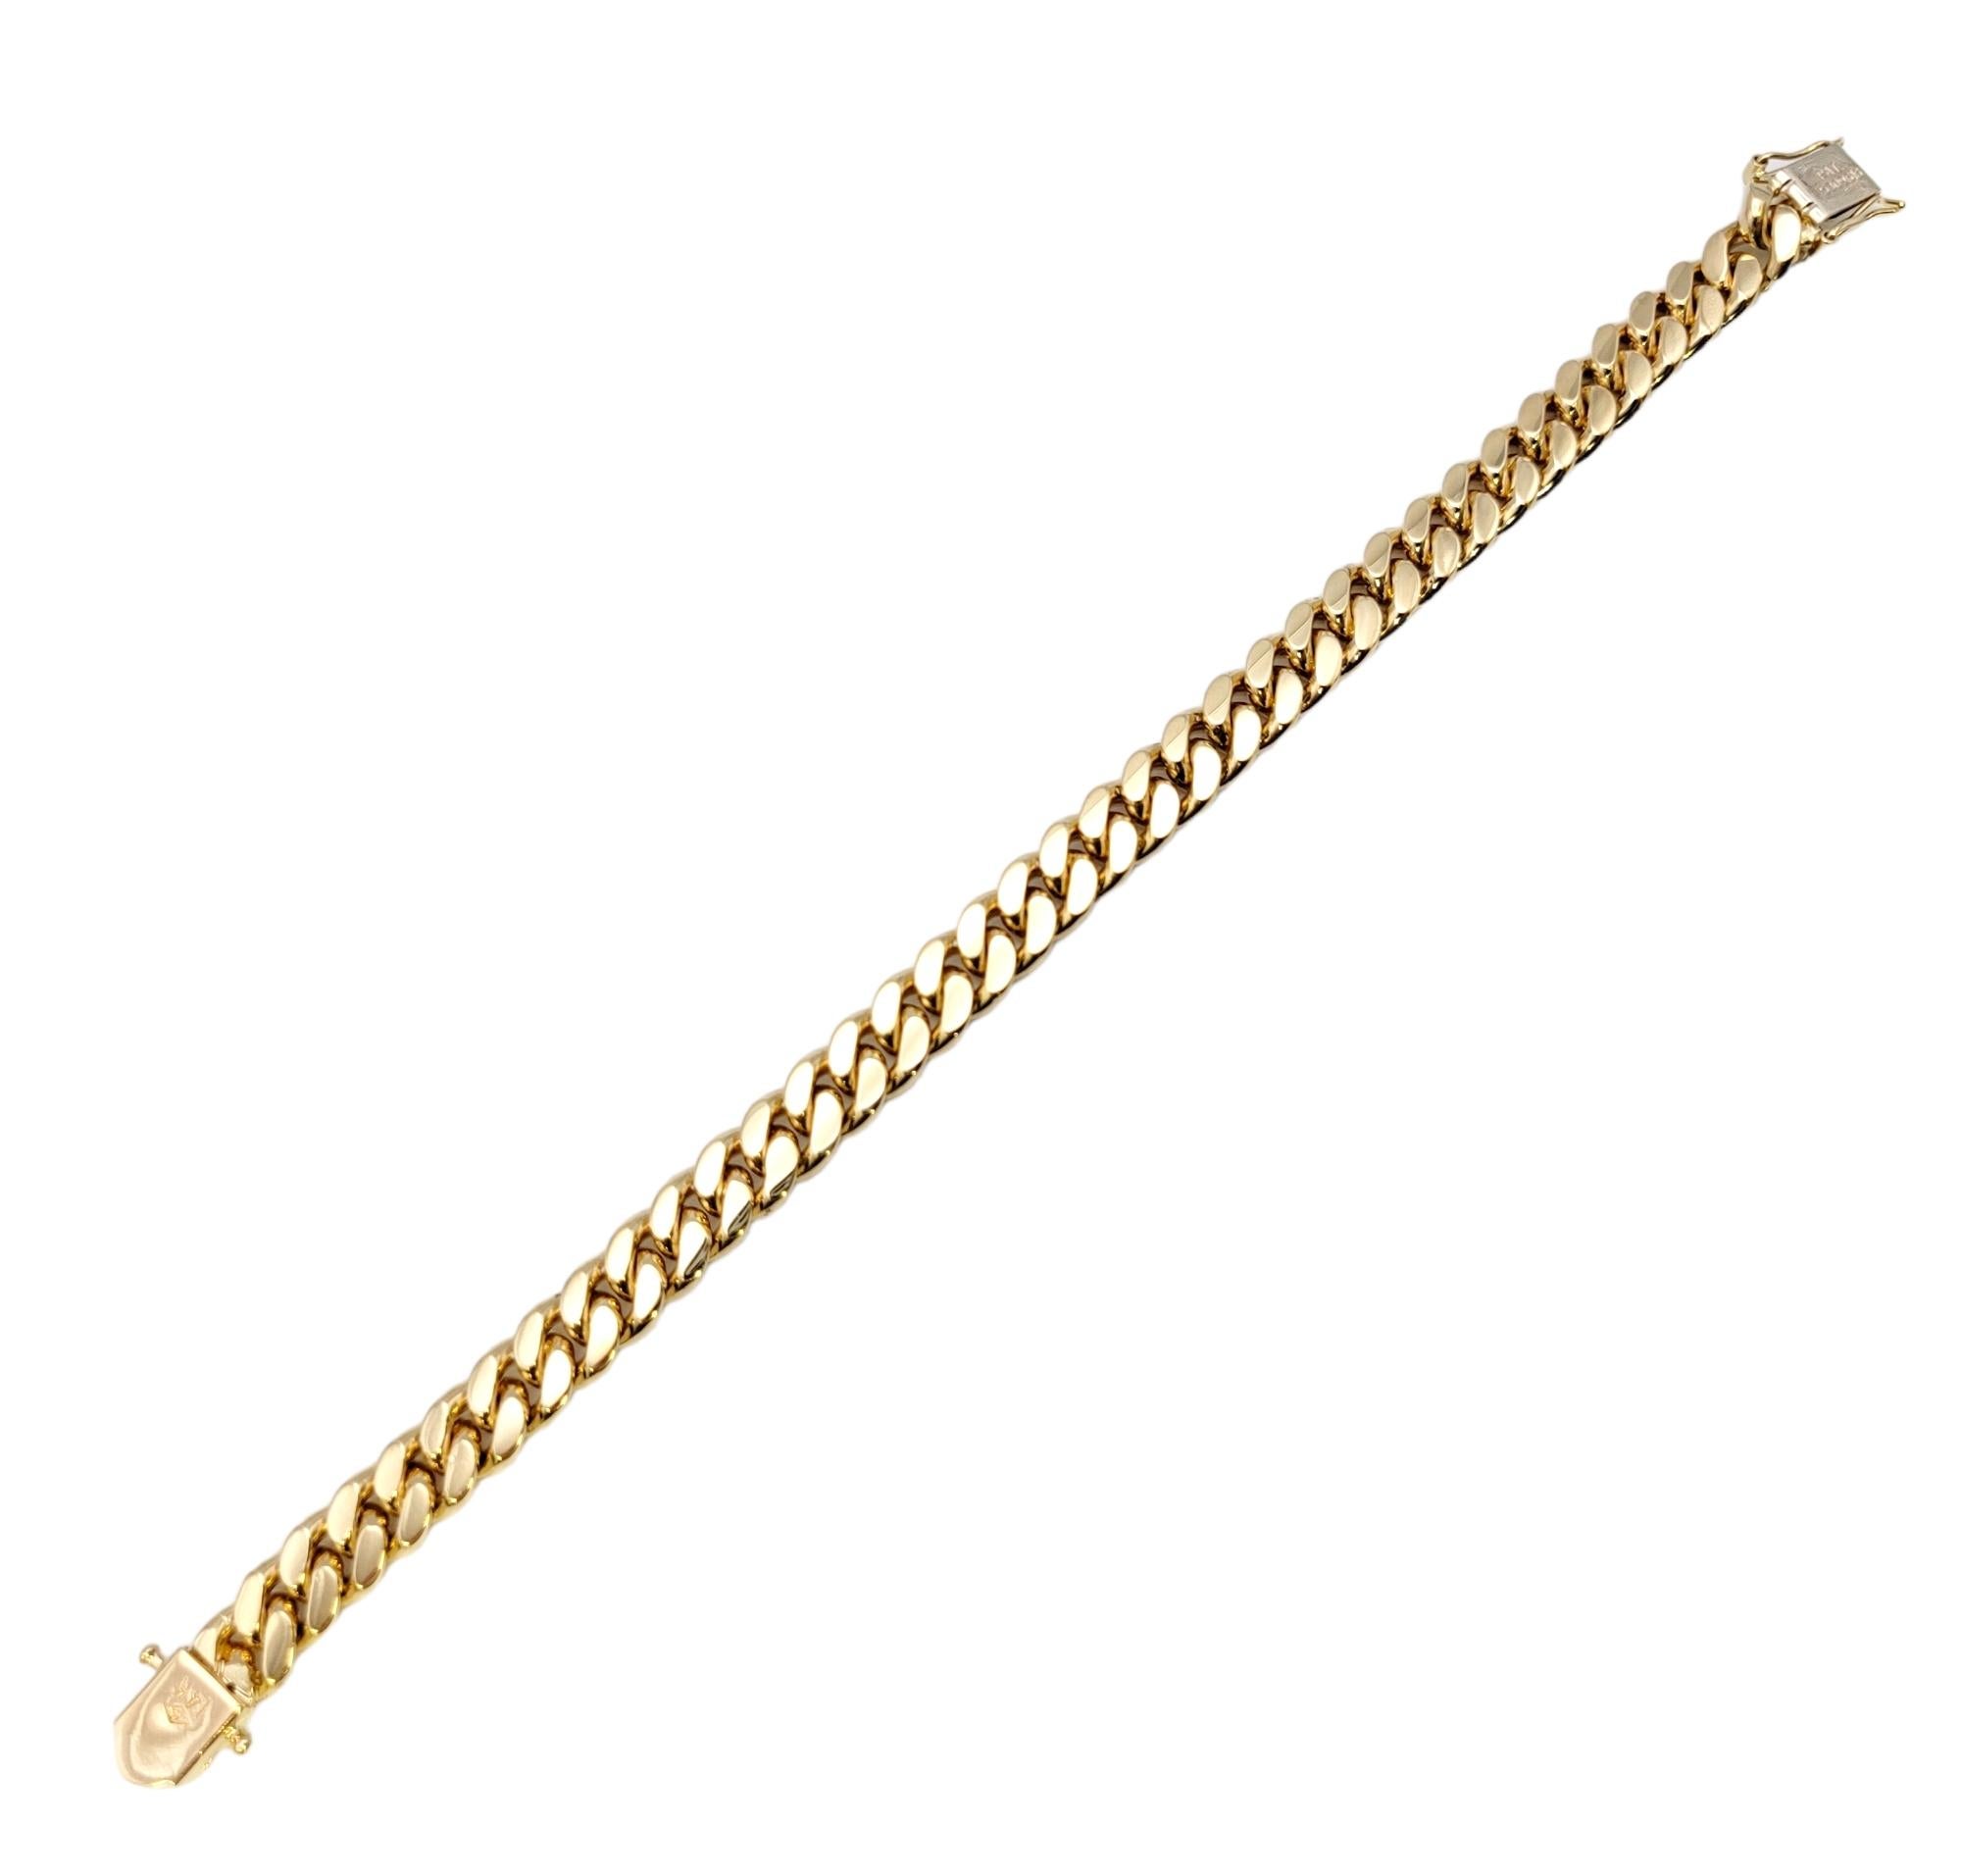 Unisex 14 Karat Yellow Gold Curb Link Bracelet with Pave Diamond Accents For Sale 5